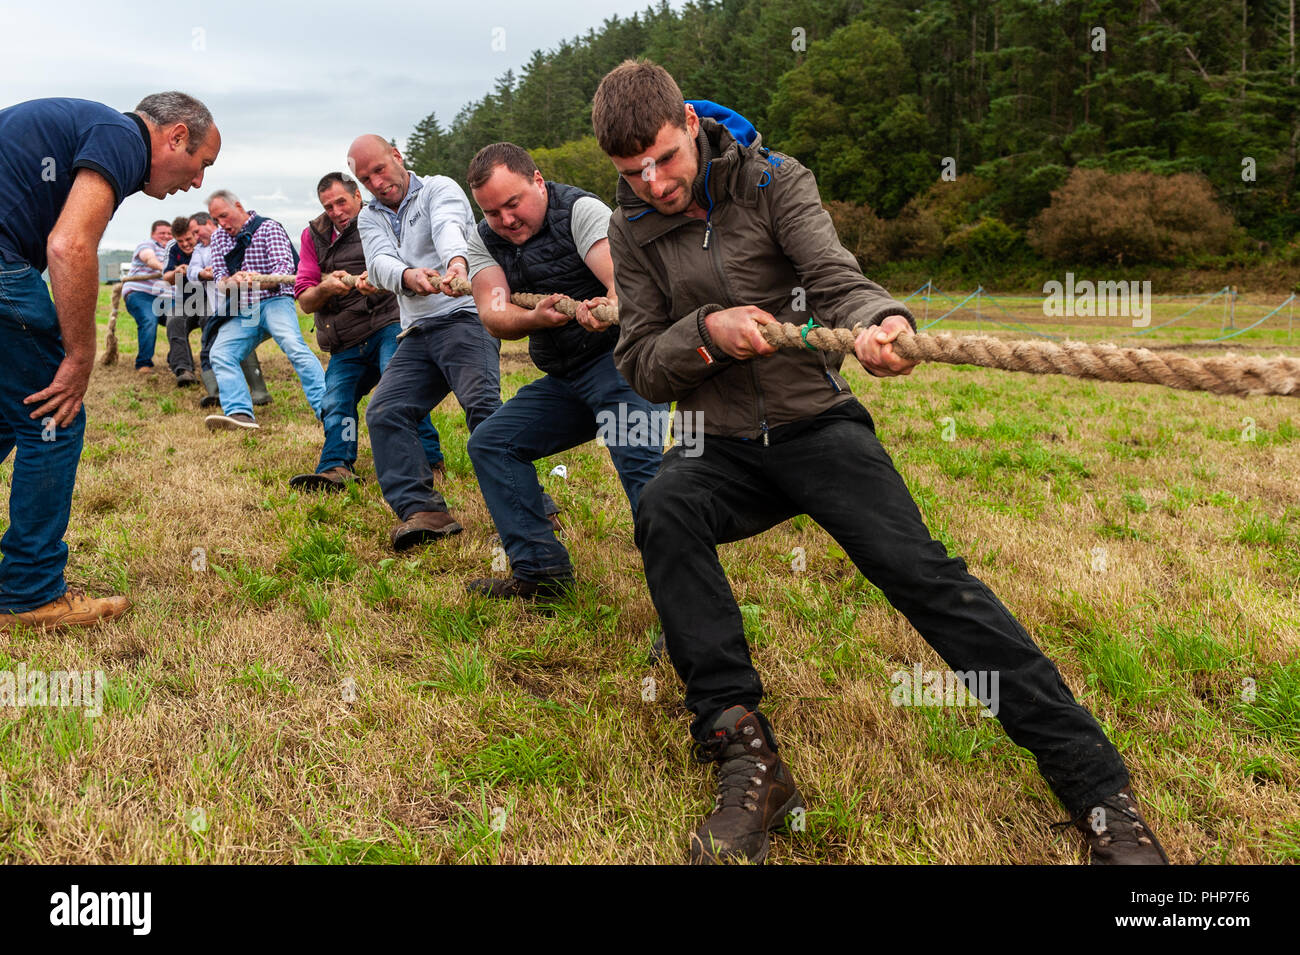 Bantry, West Cork, Ireland. 2nd Sept, 2018. Bantry Agricultural Show is taking place at the Bantry Airstrip today in appalling weather. One of the last events of the show was the hotly contested Tug-O-War. Credit: Andy Gibson/Alamy Live News Stock Photo